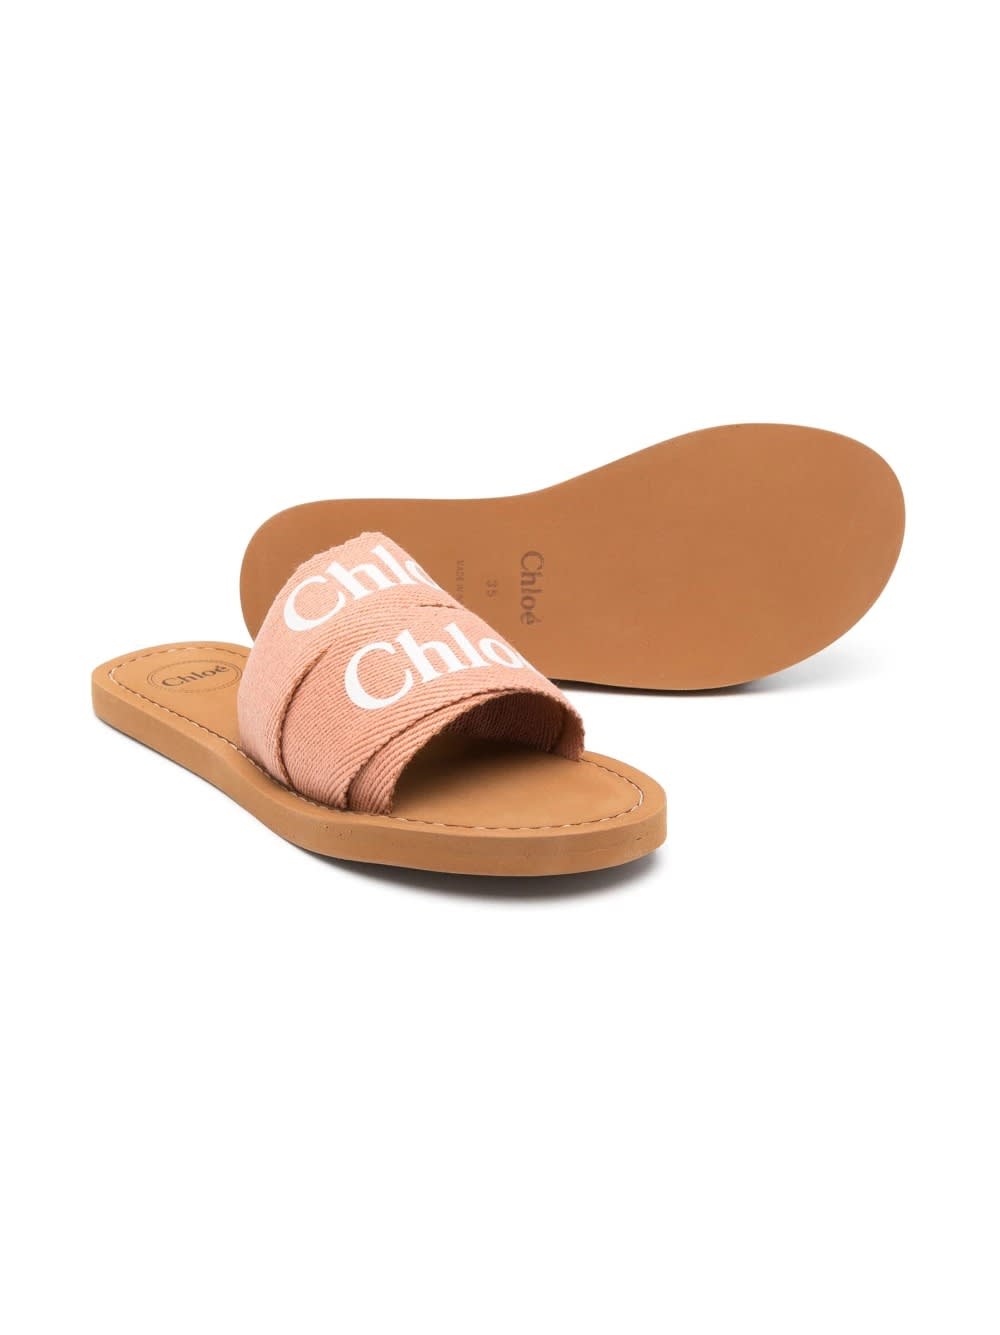 CHLOÉ WOODY SANDAL IN BROWN LINEN WITH LOGO 